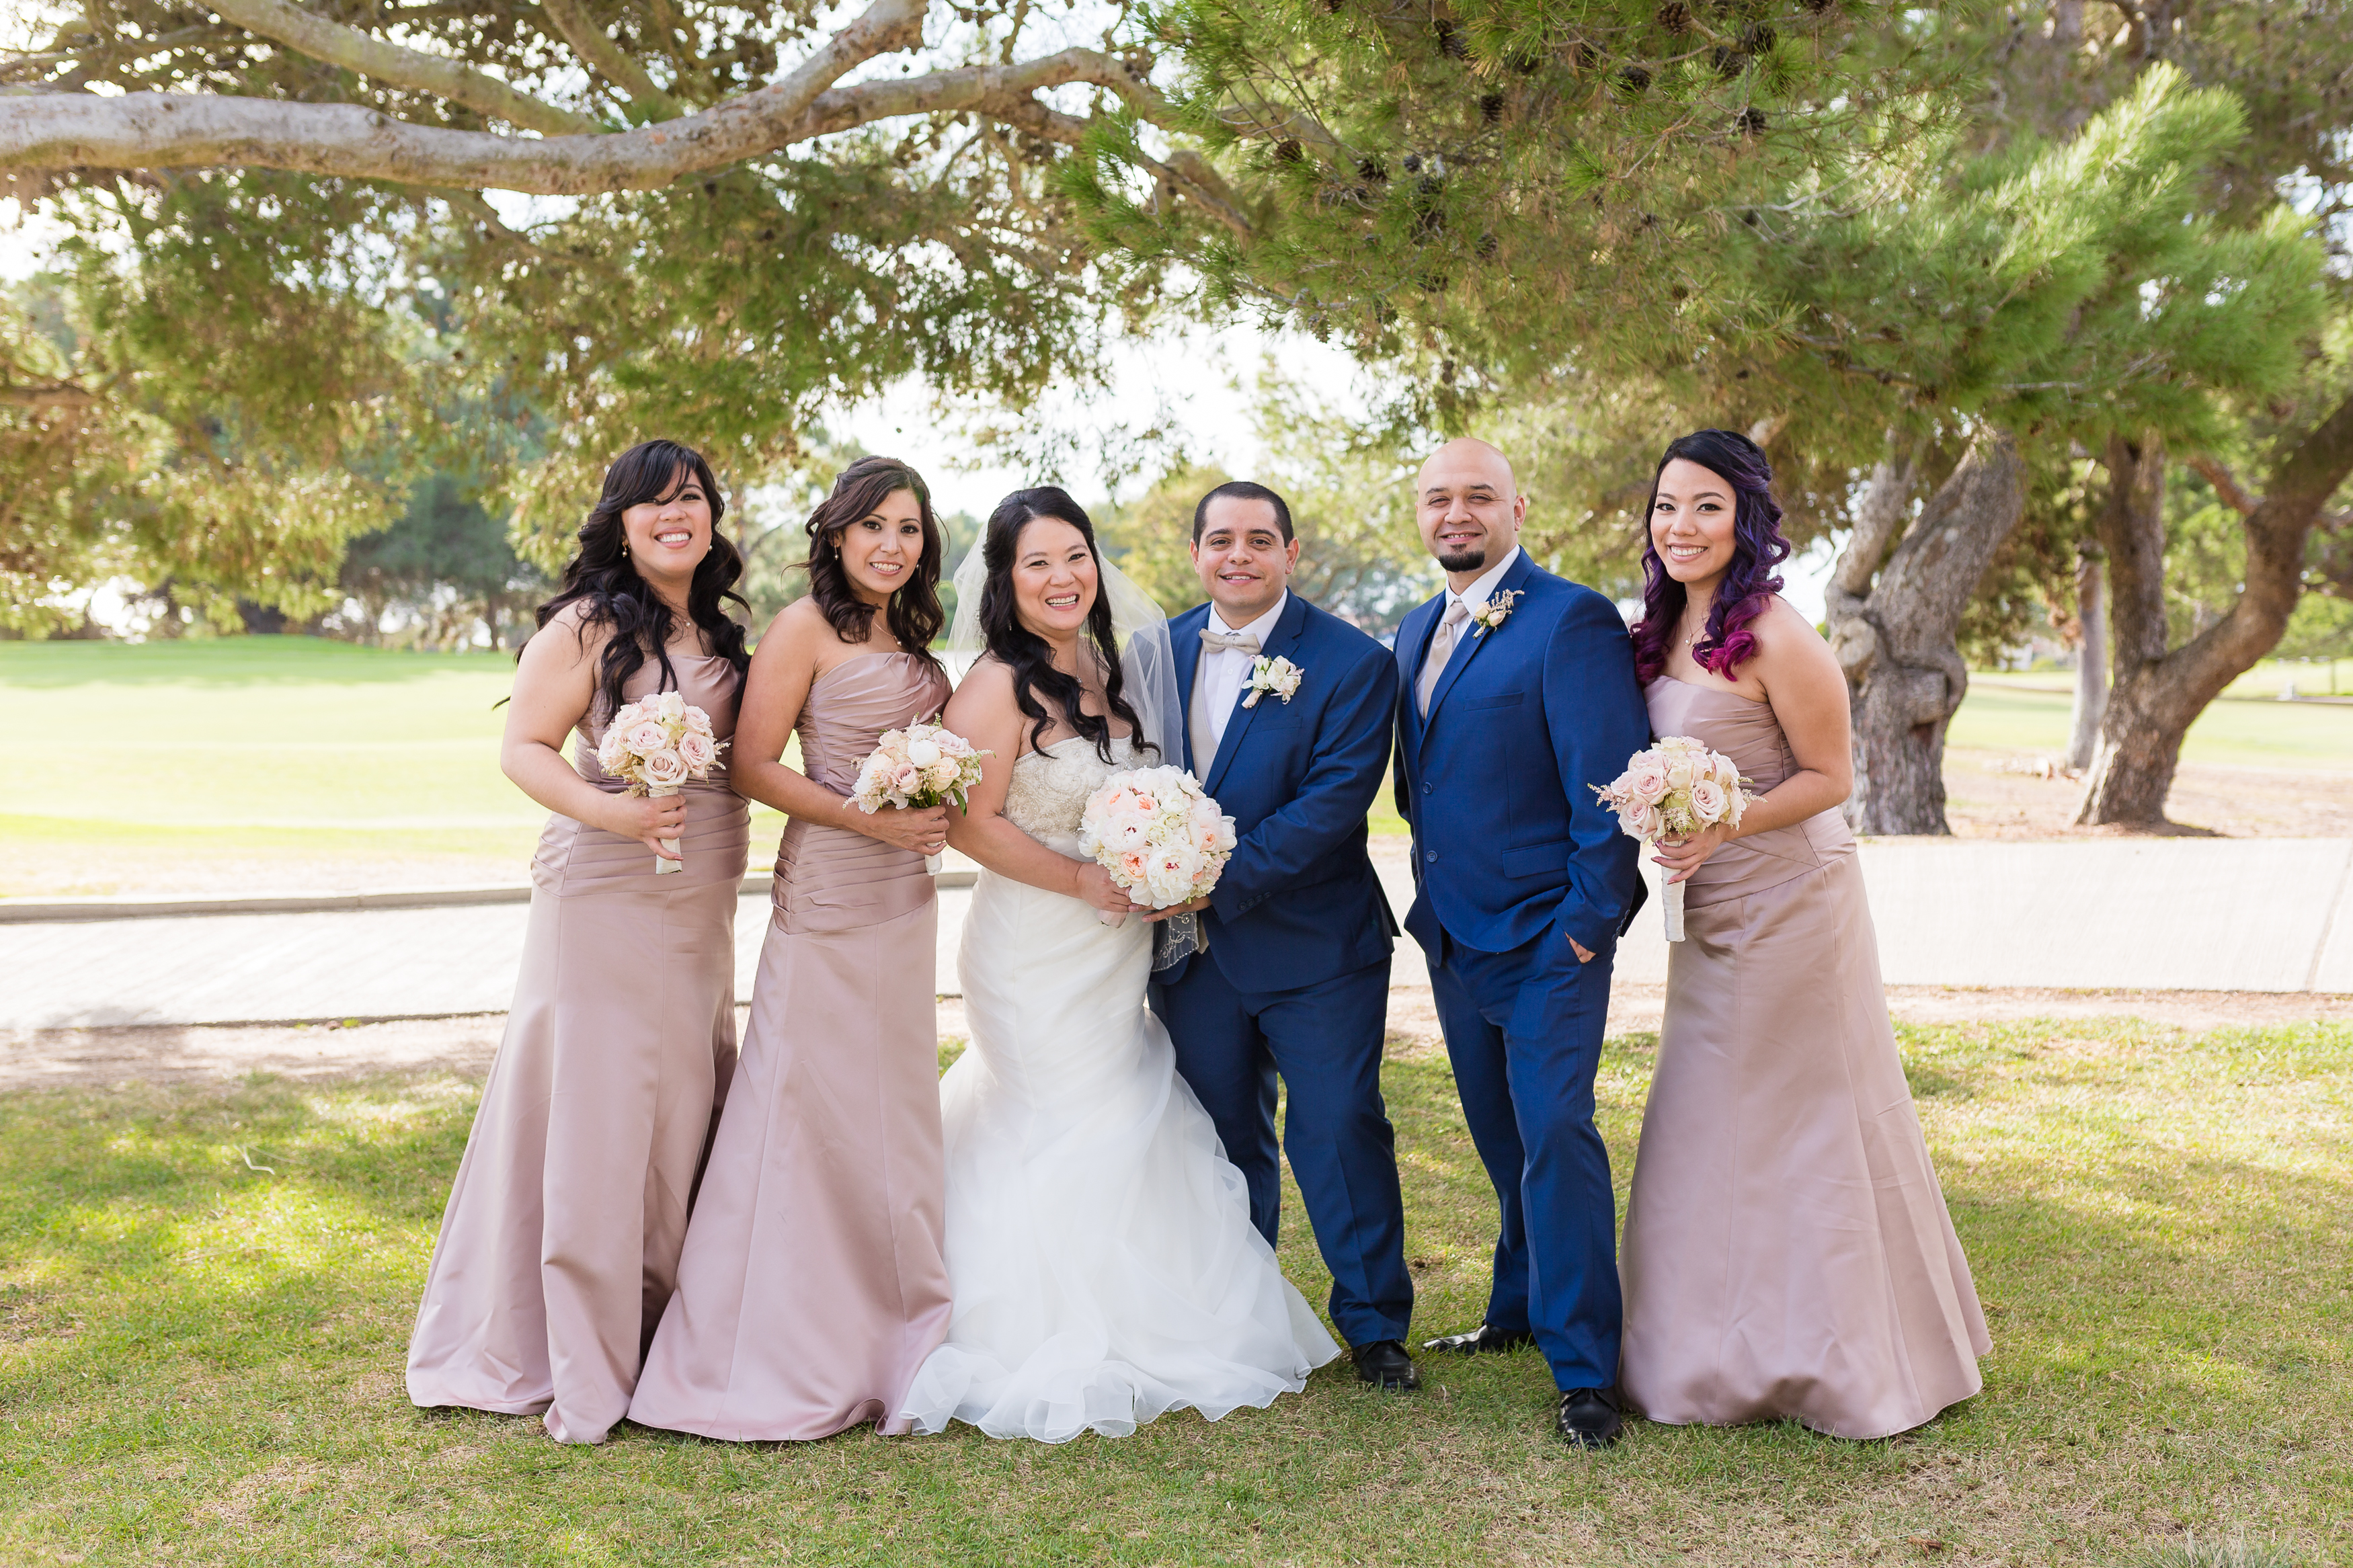 Bride and groom with bridesmaids and best man